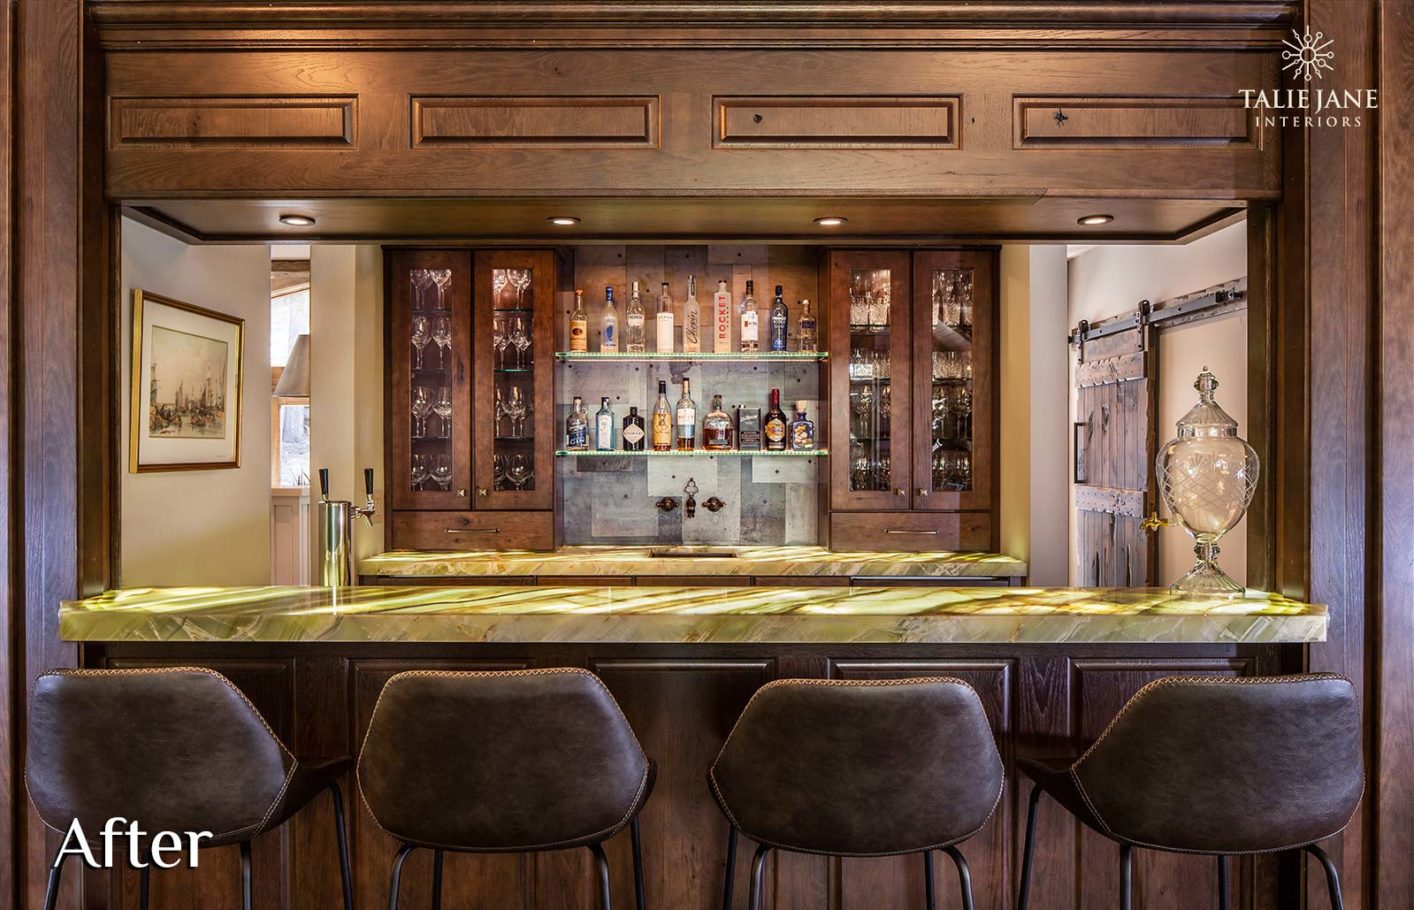 The close-up view of a wet bar with a wooden finish